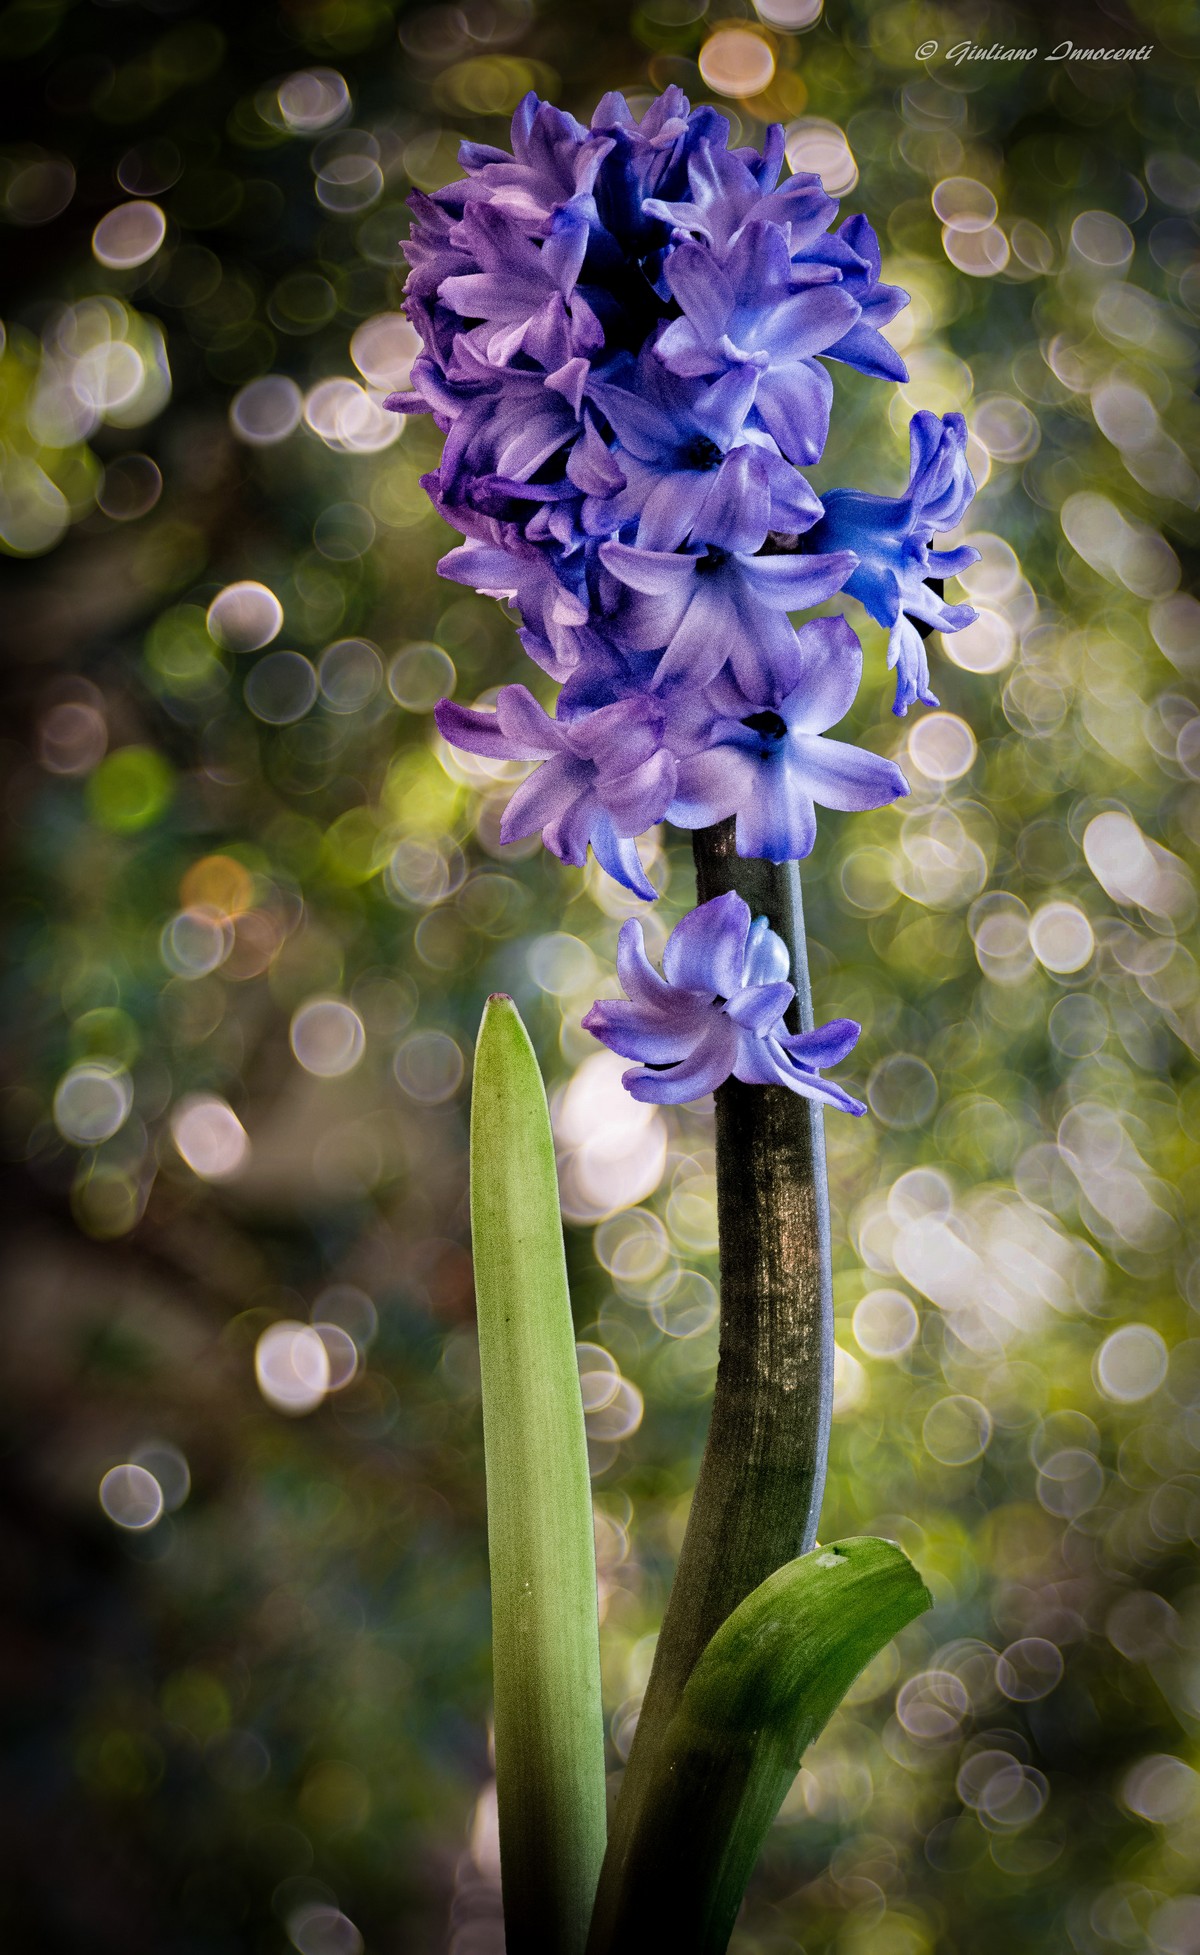 The scent of hyacinth...